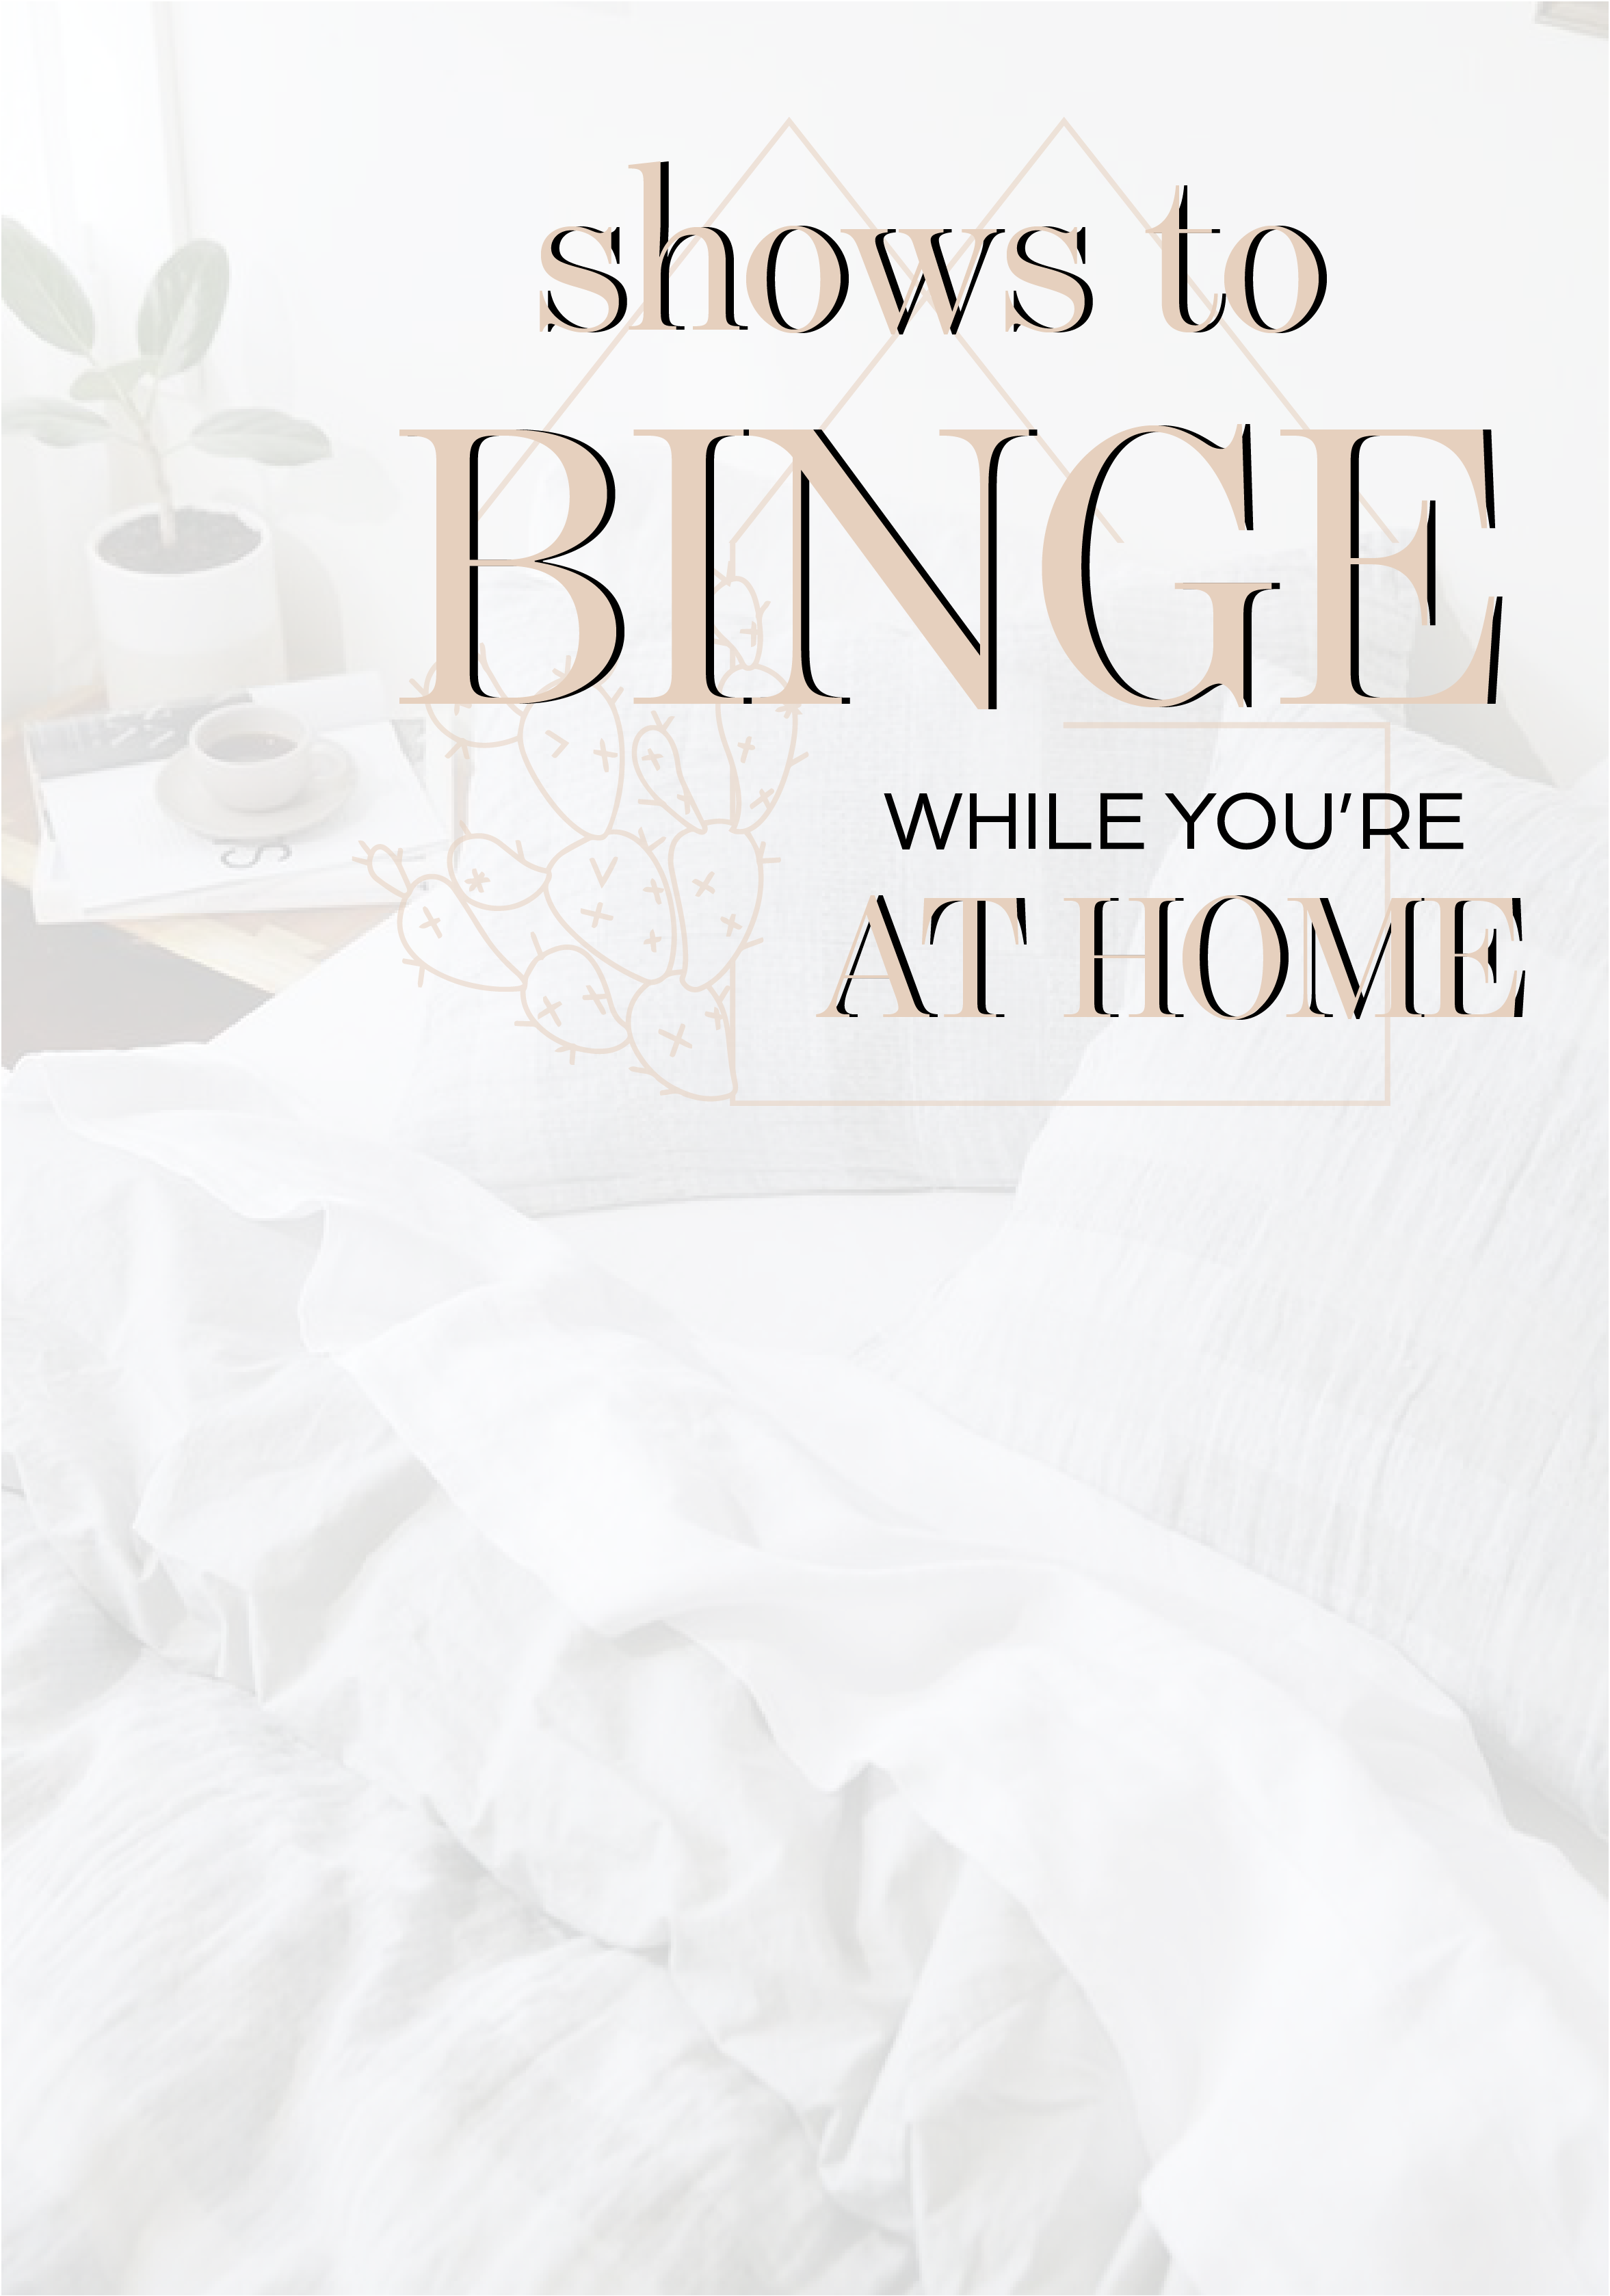 Shows to Binge While You're Home